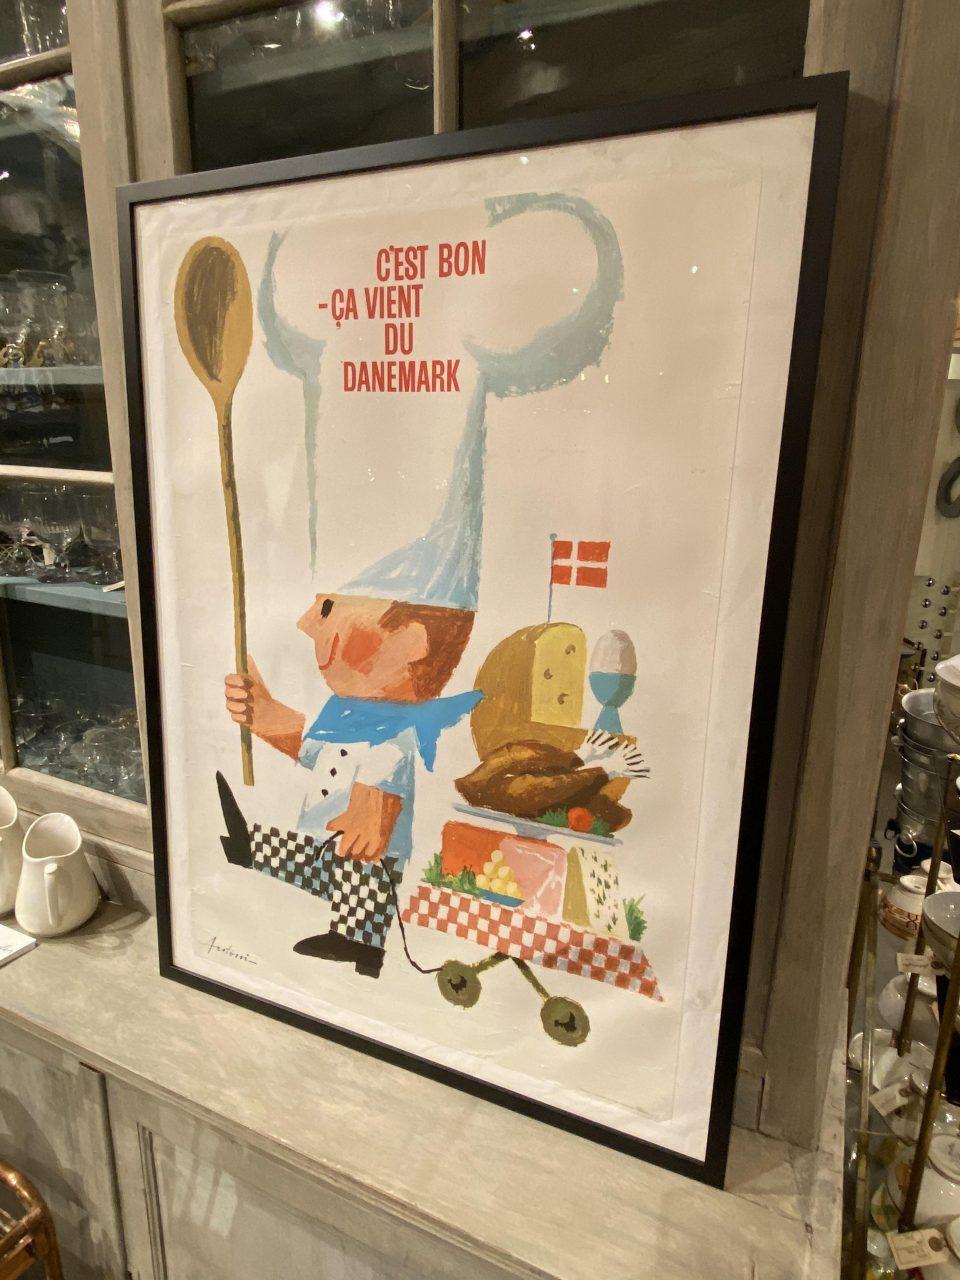 Vintage Danish advertising poster, found in a flea market in the South of France. Designed by the renowned Danish sketcher, poster artist and graphic designer Ib Antoni Jensen (1929-73), who is also known for his posters for Tivoli in Copenhagen.